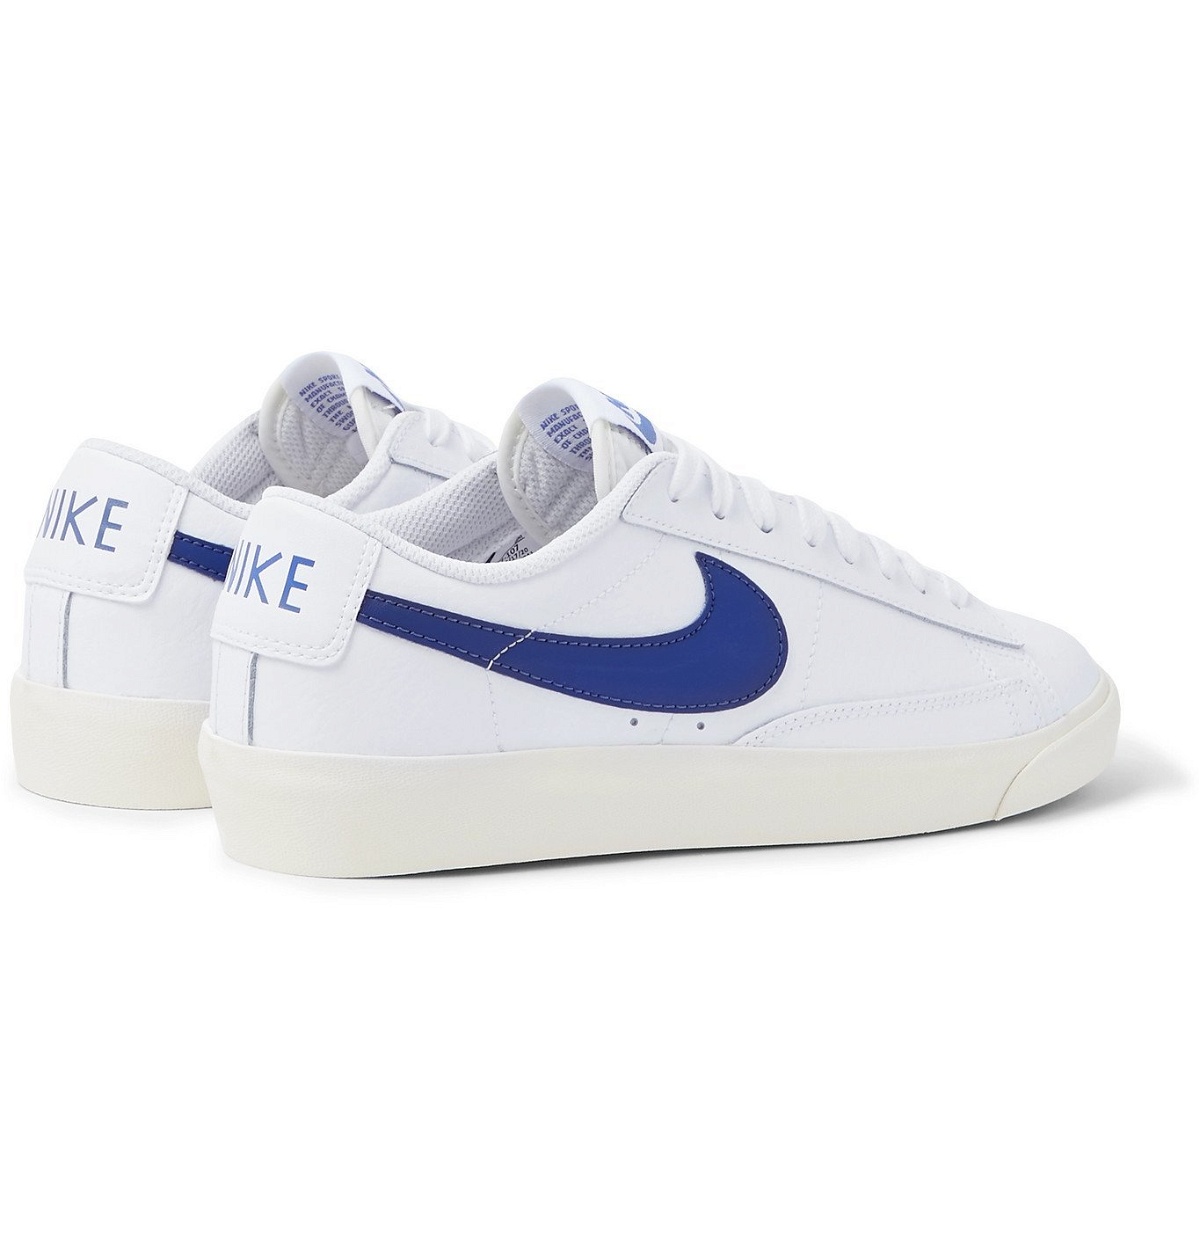 NIKE Air Force 1 Low Retro leather sneakers | NET-A-PORTER